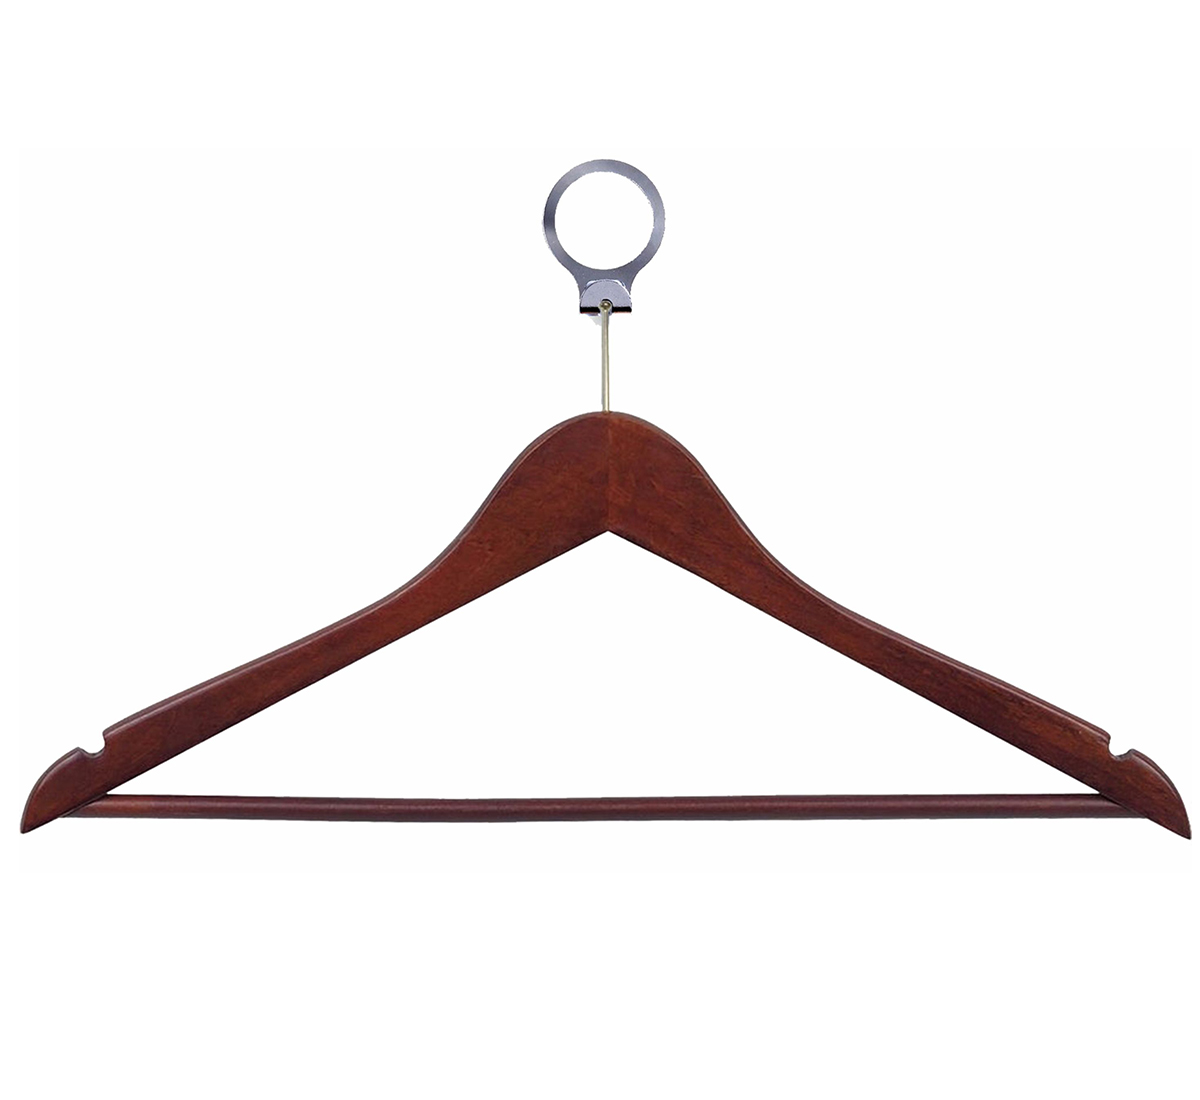 Brown wooden cloth hanger for clothes